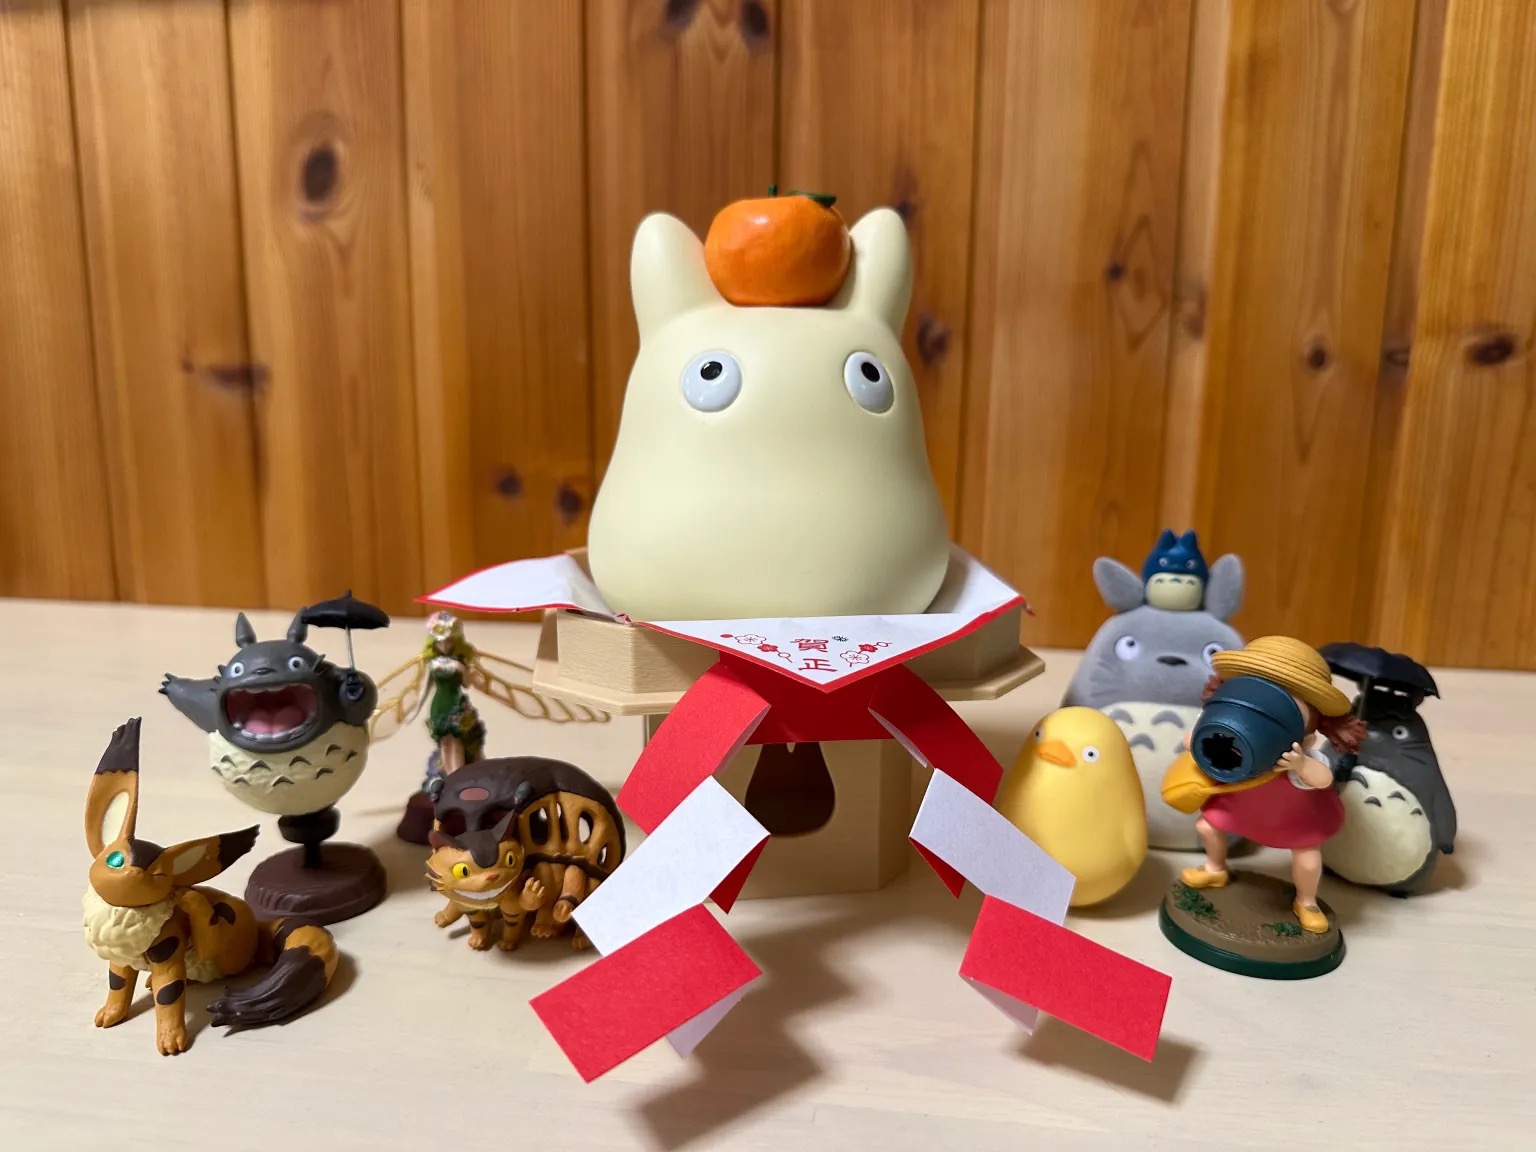 Ghibli New Year's Totoro decoration sells out online, but there's